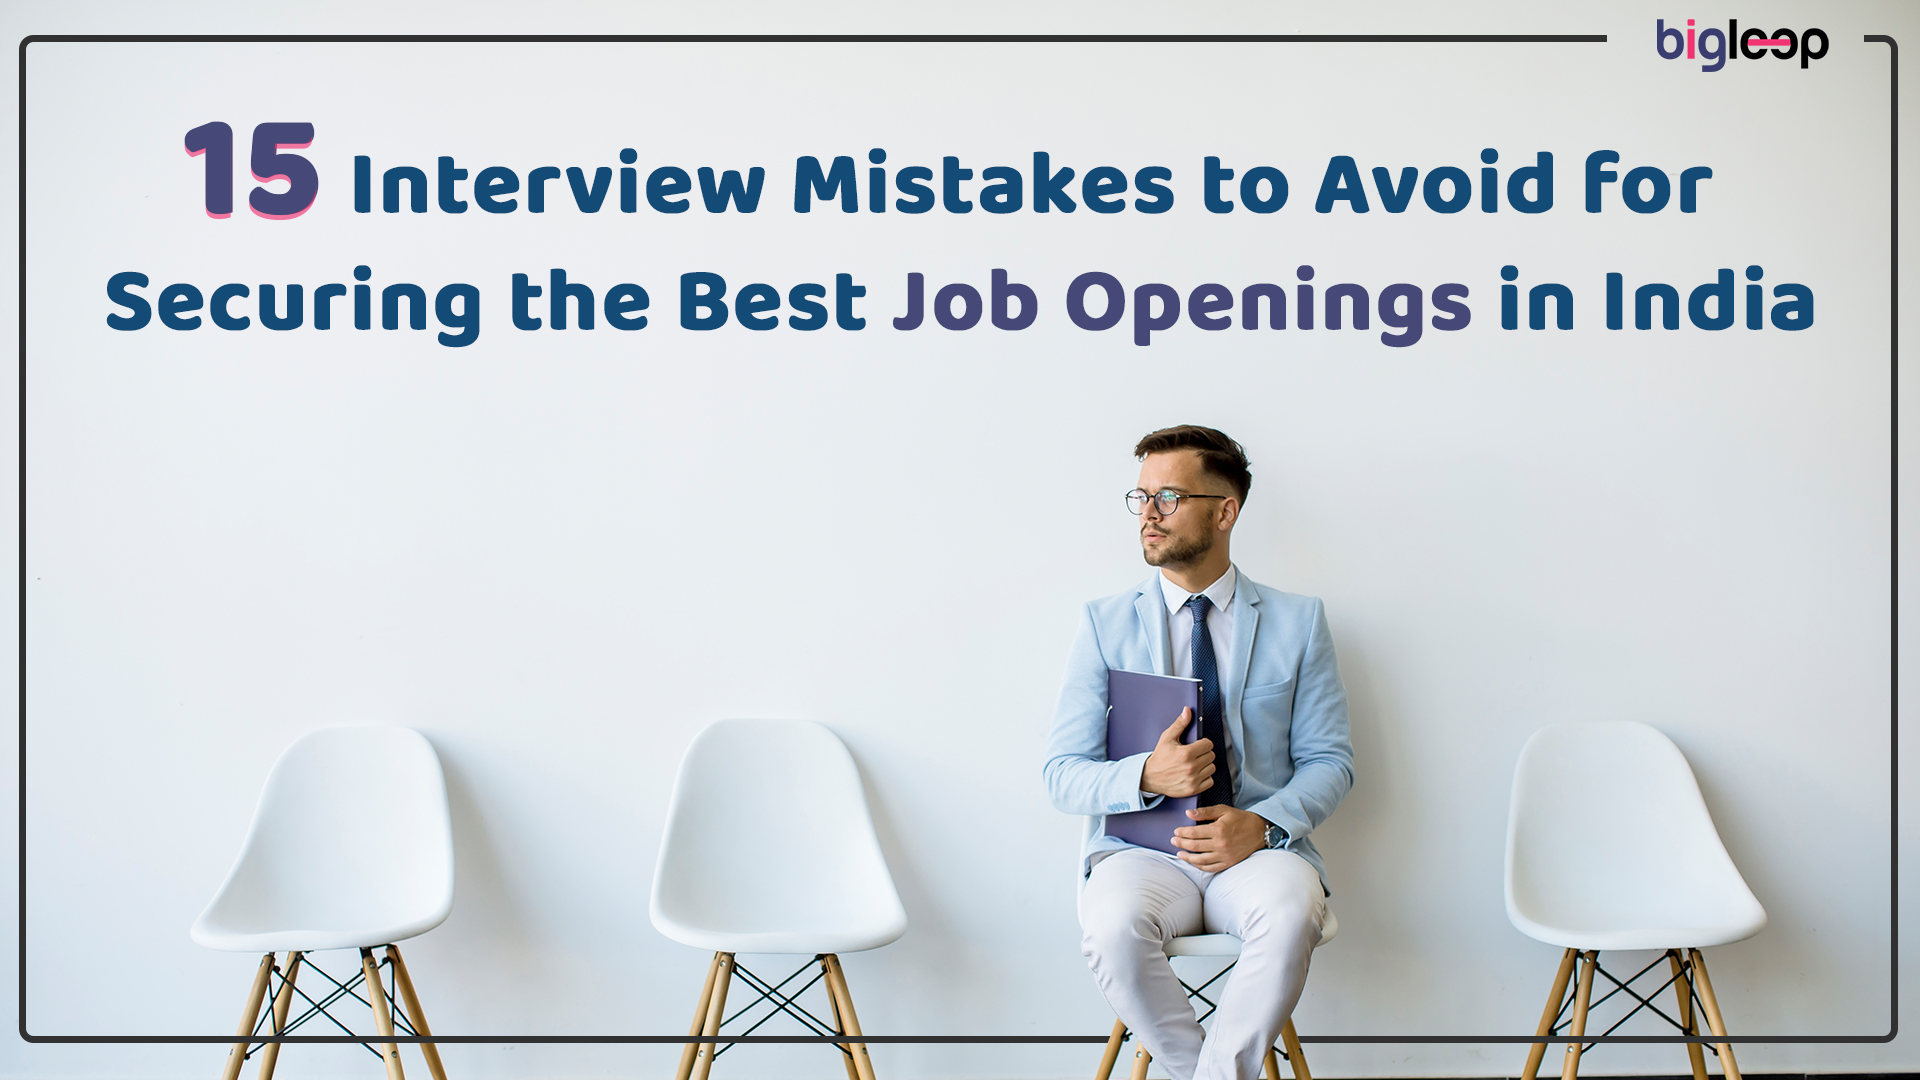 15 Interview Mistakes to Avoid for Securing the Best Job Openings in India